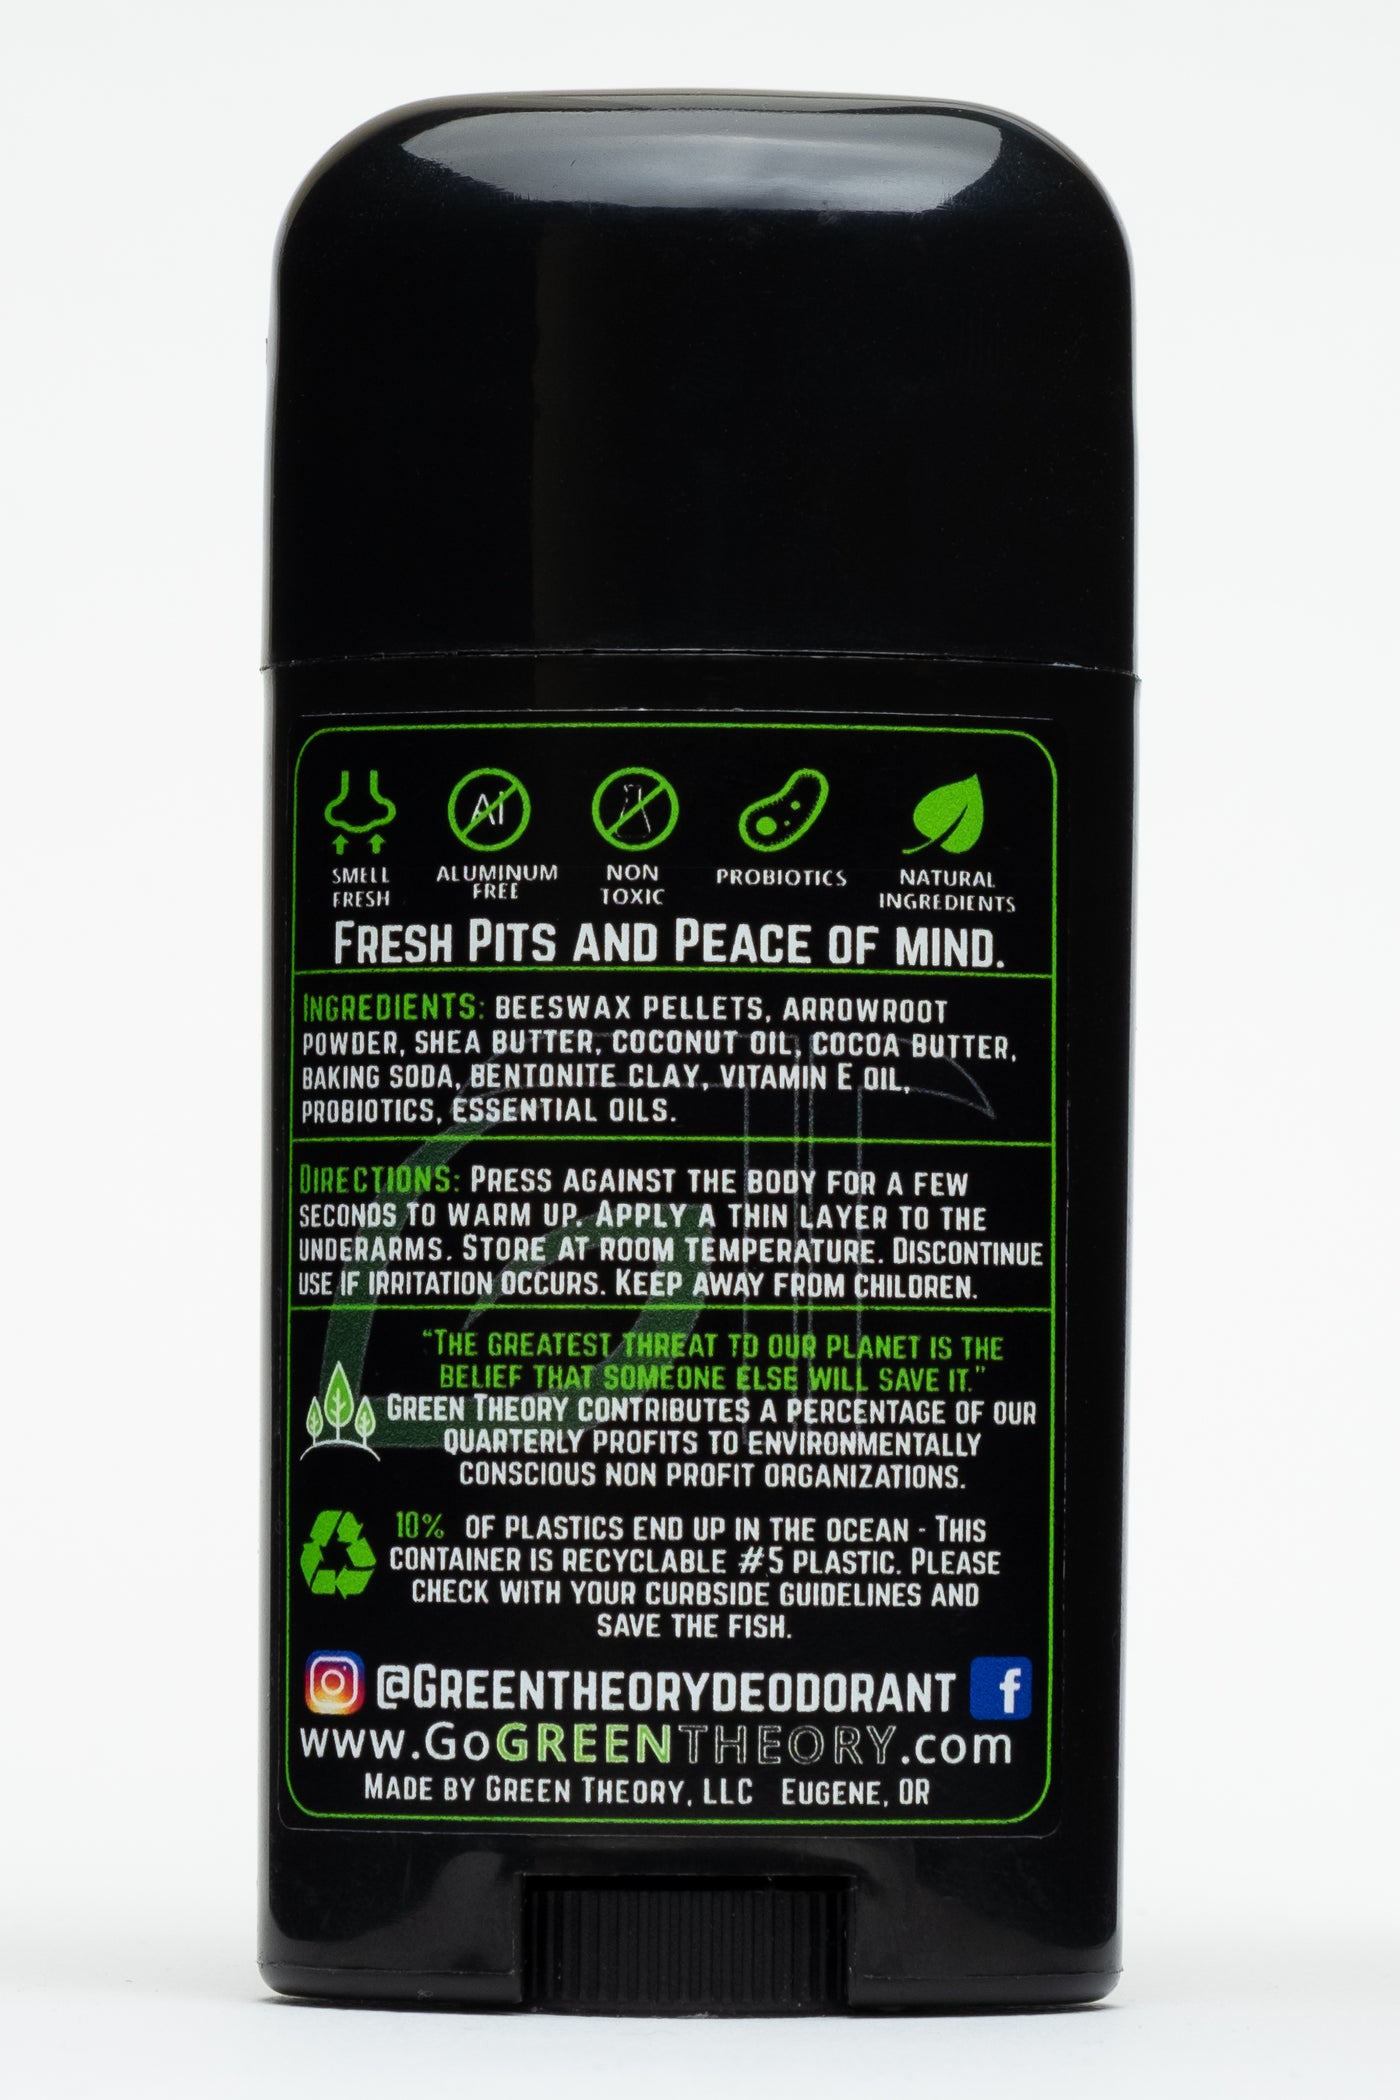 Photo of the back label for green theoy biohazard probiotic natural deodorant for men. Top of label depicts five graphics of benefits followed by list of ingredients, directions, a reminder to recycle the container and then the green theory website and social media pages